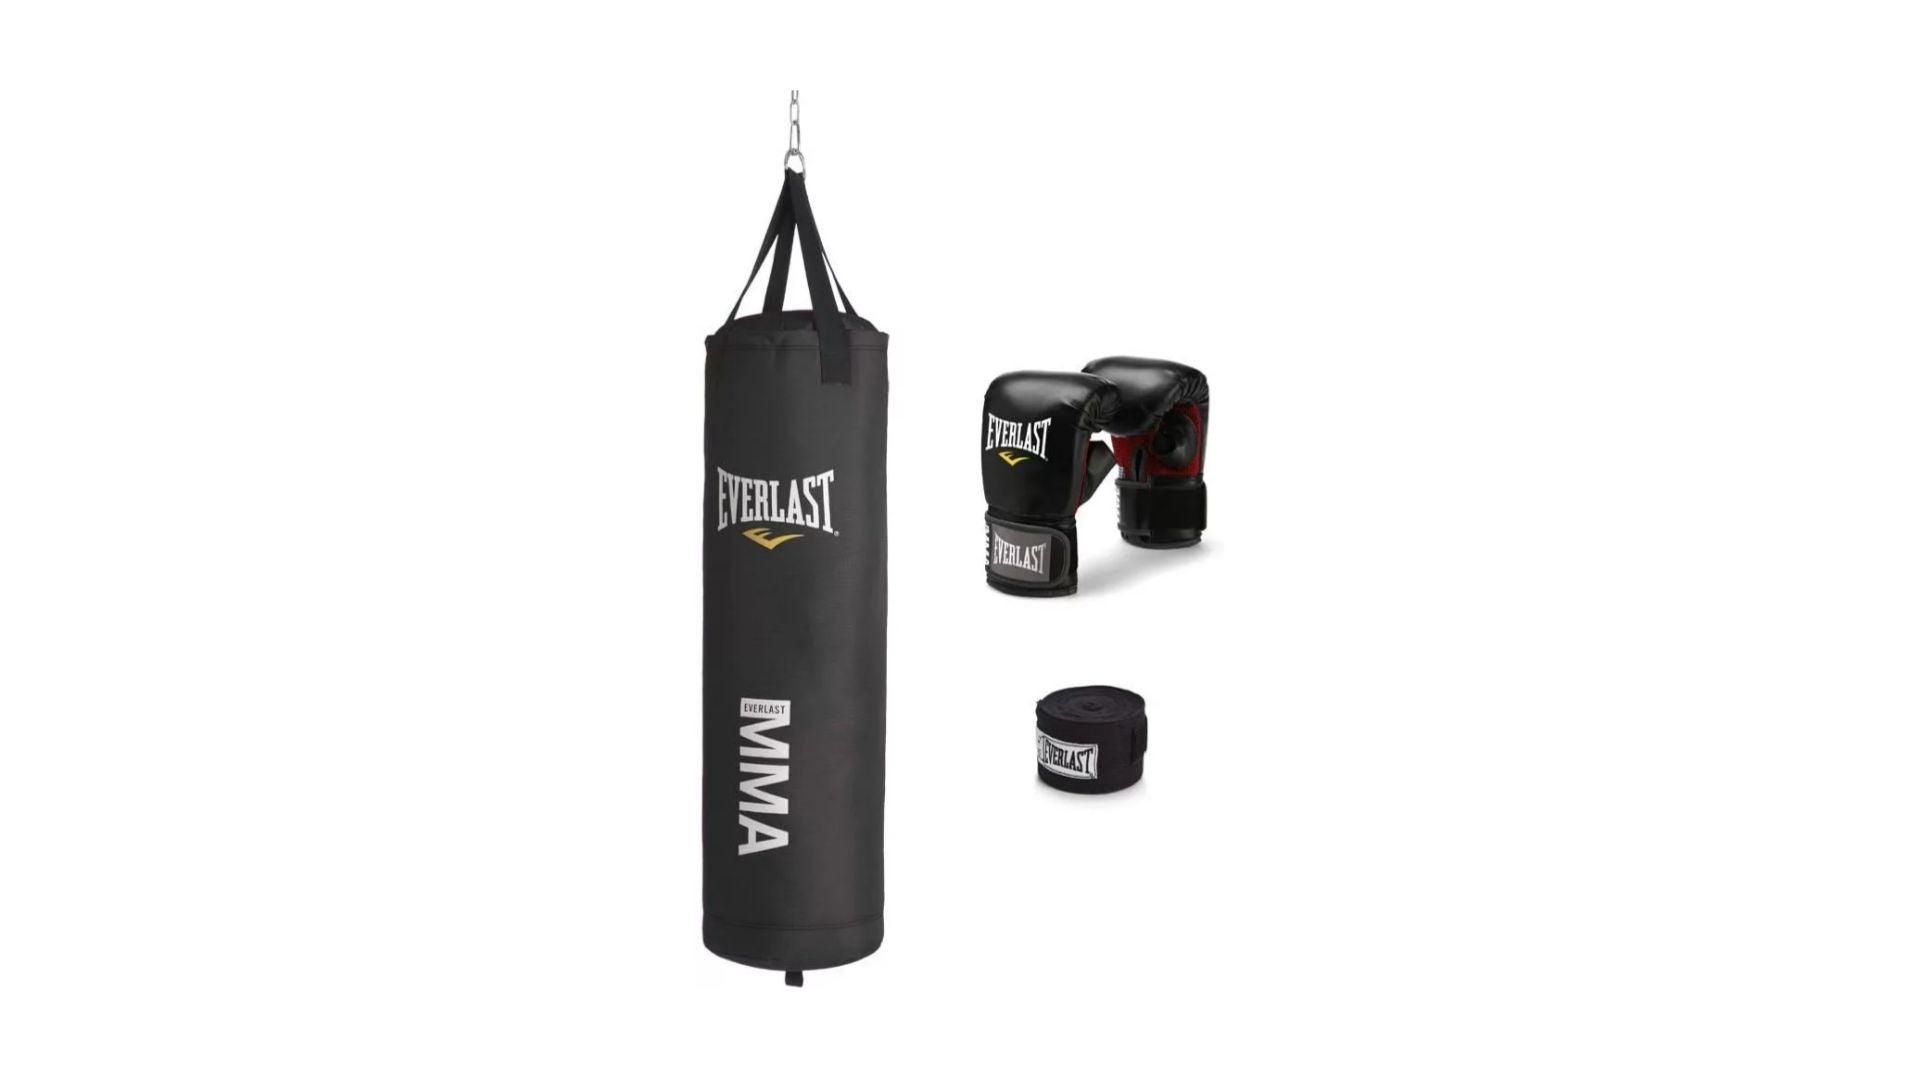 New Everlast Double End Heavy Punching Boxing Bag Anchor Fitness Training 